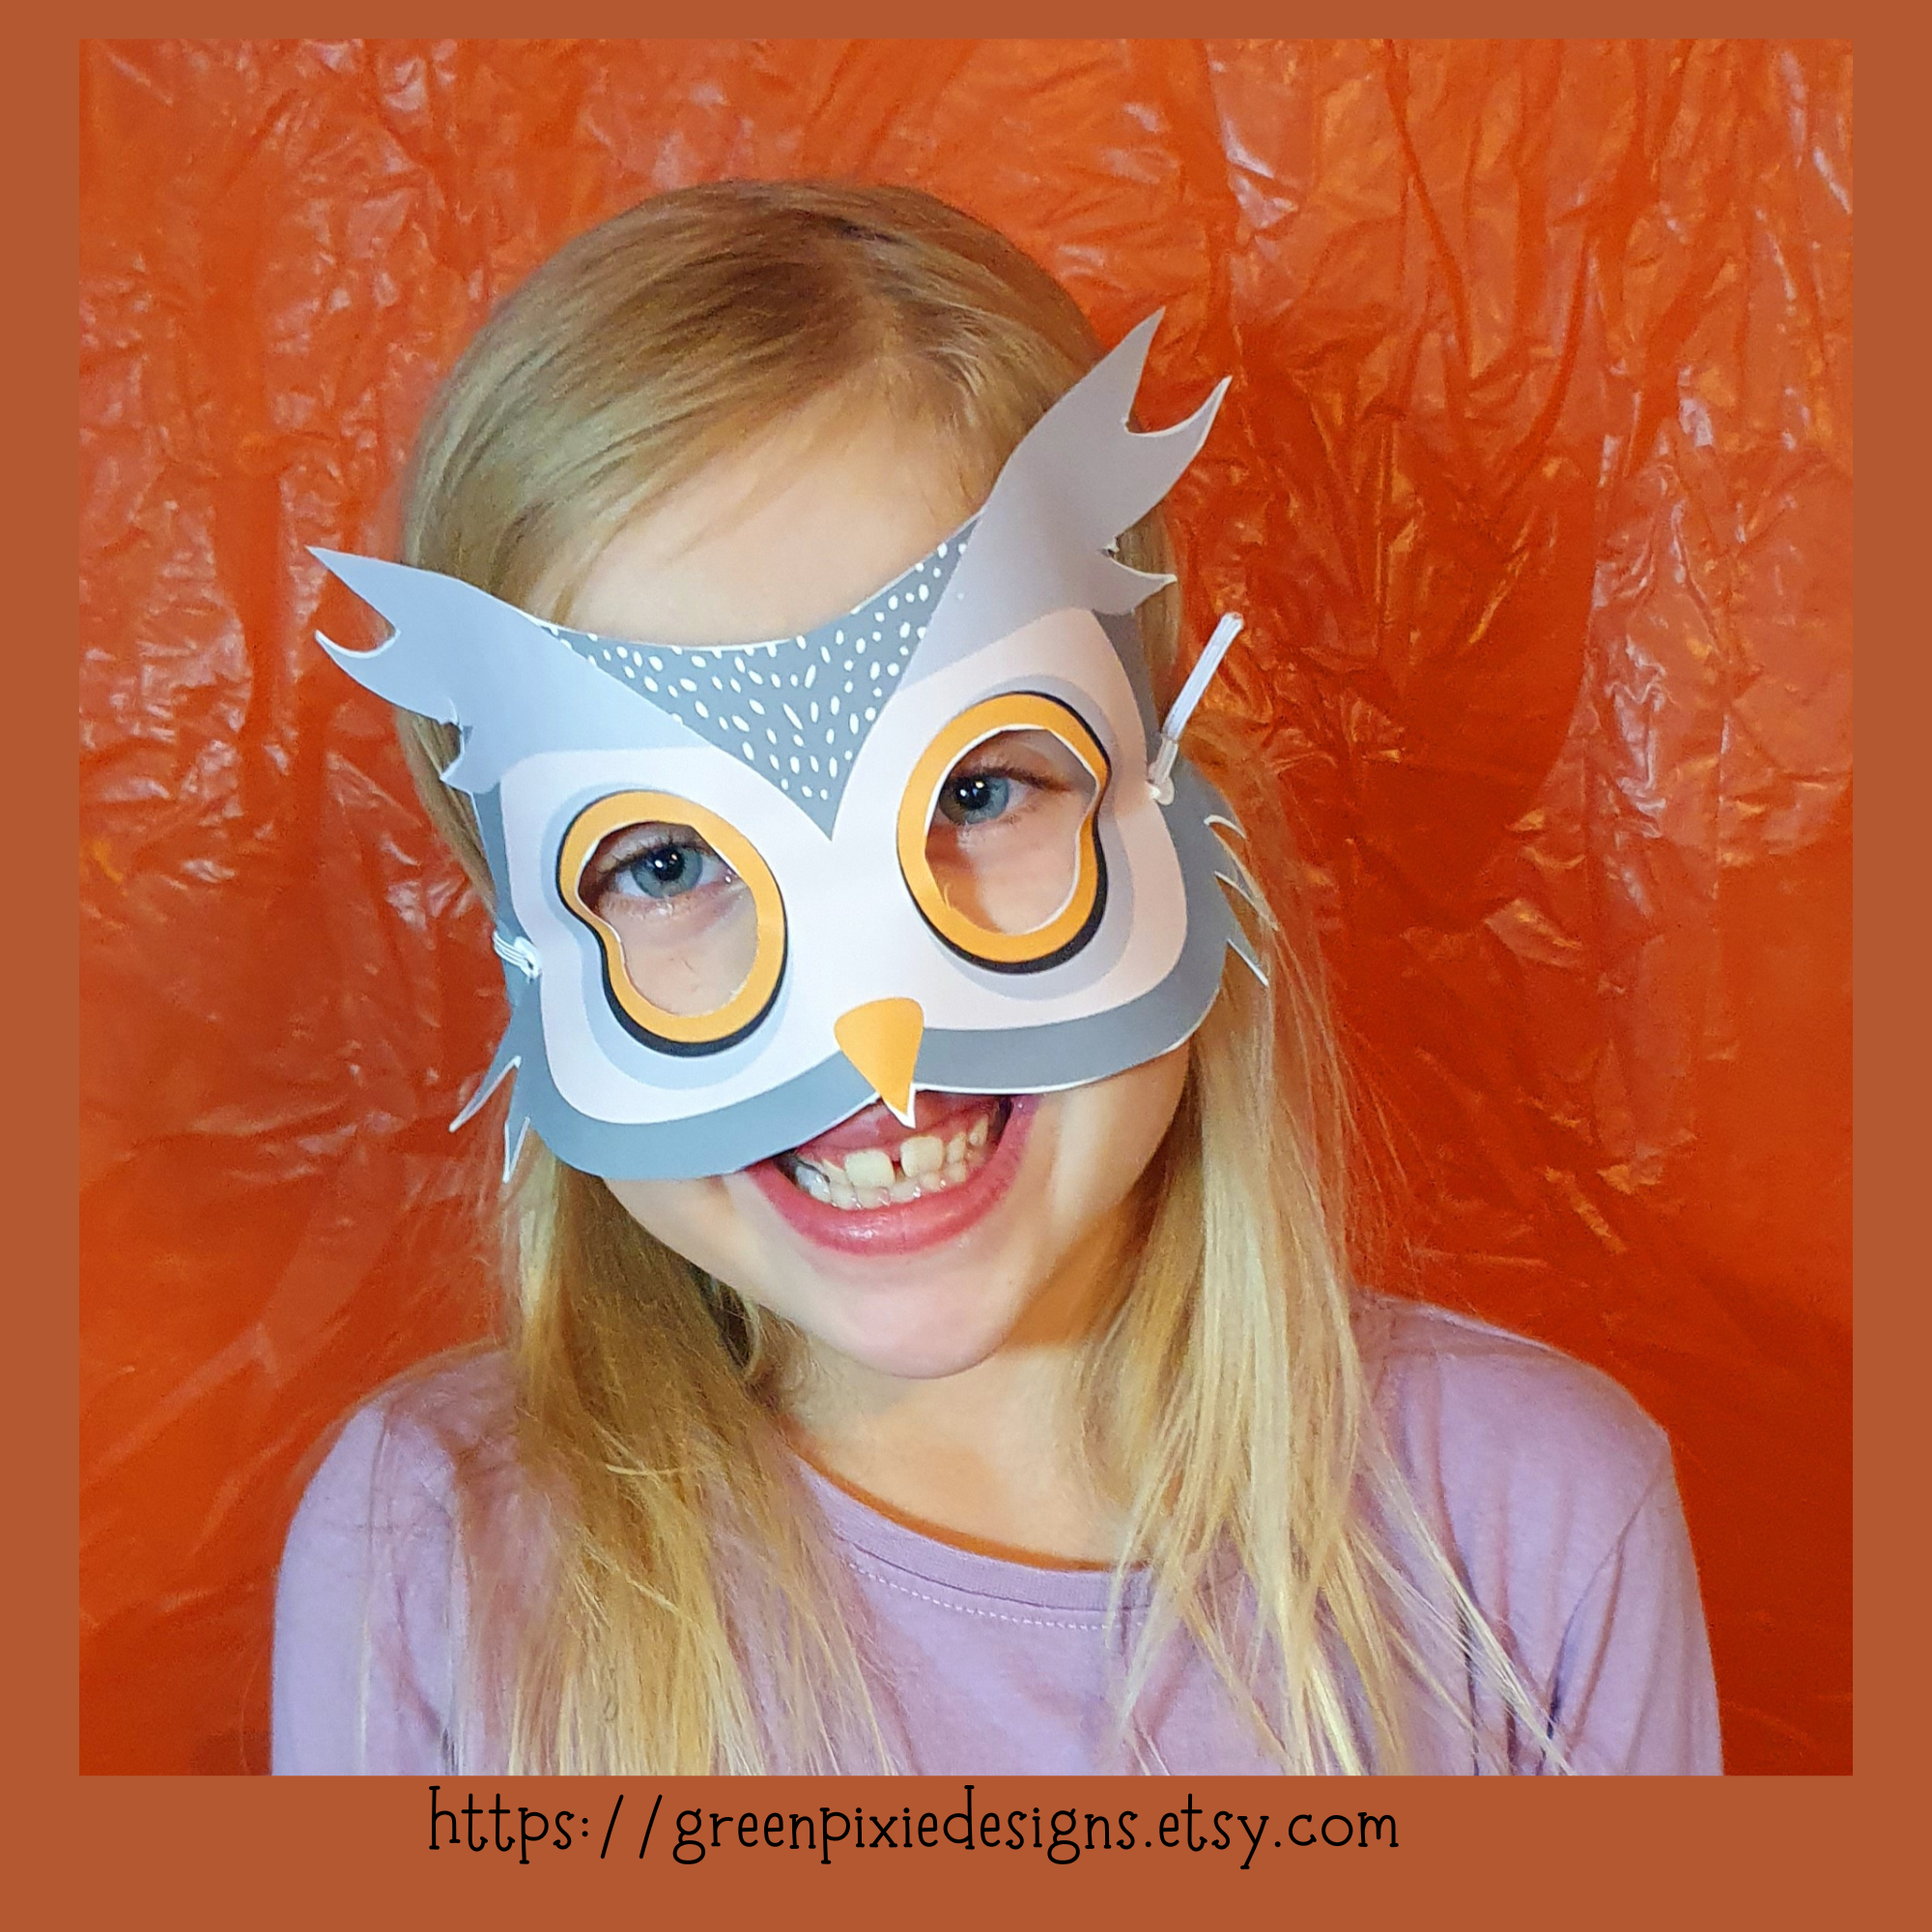 Learn how to make a DIY Woodland Owl Mask